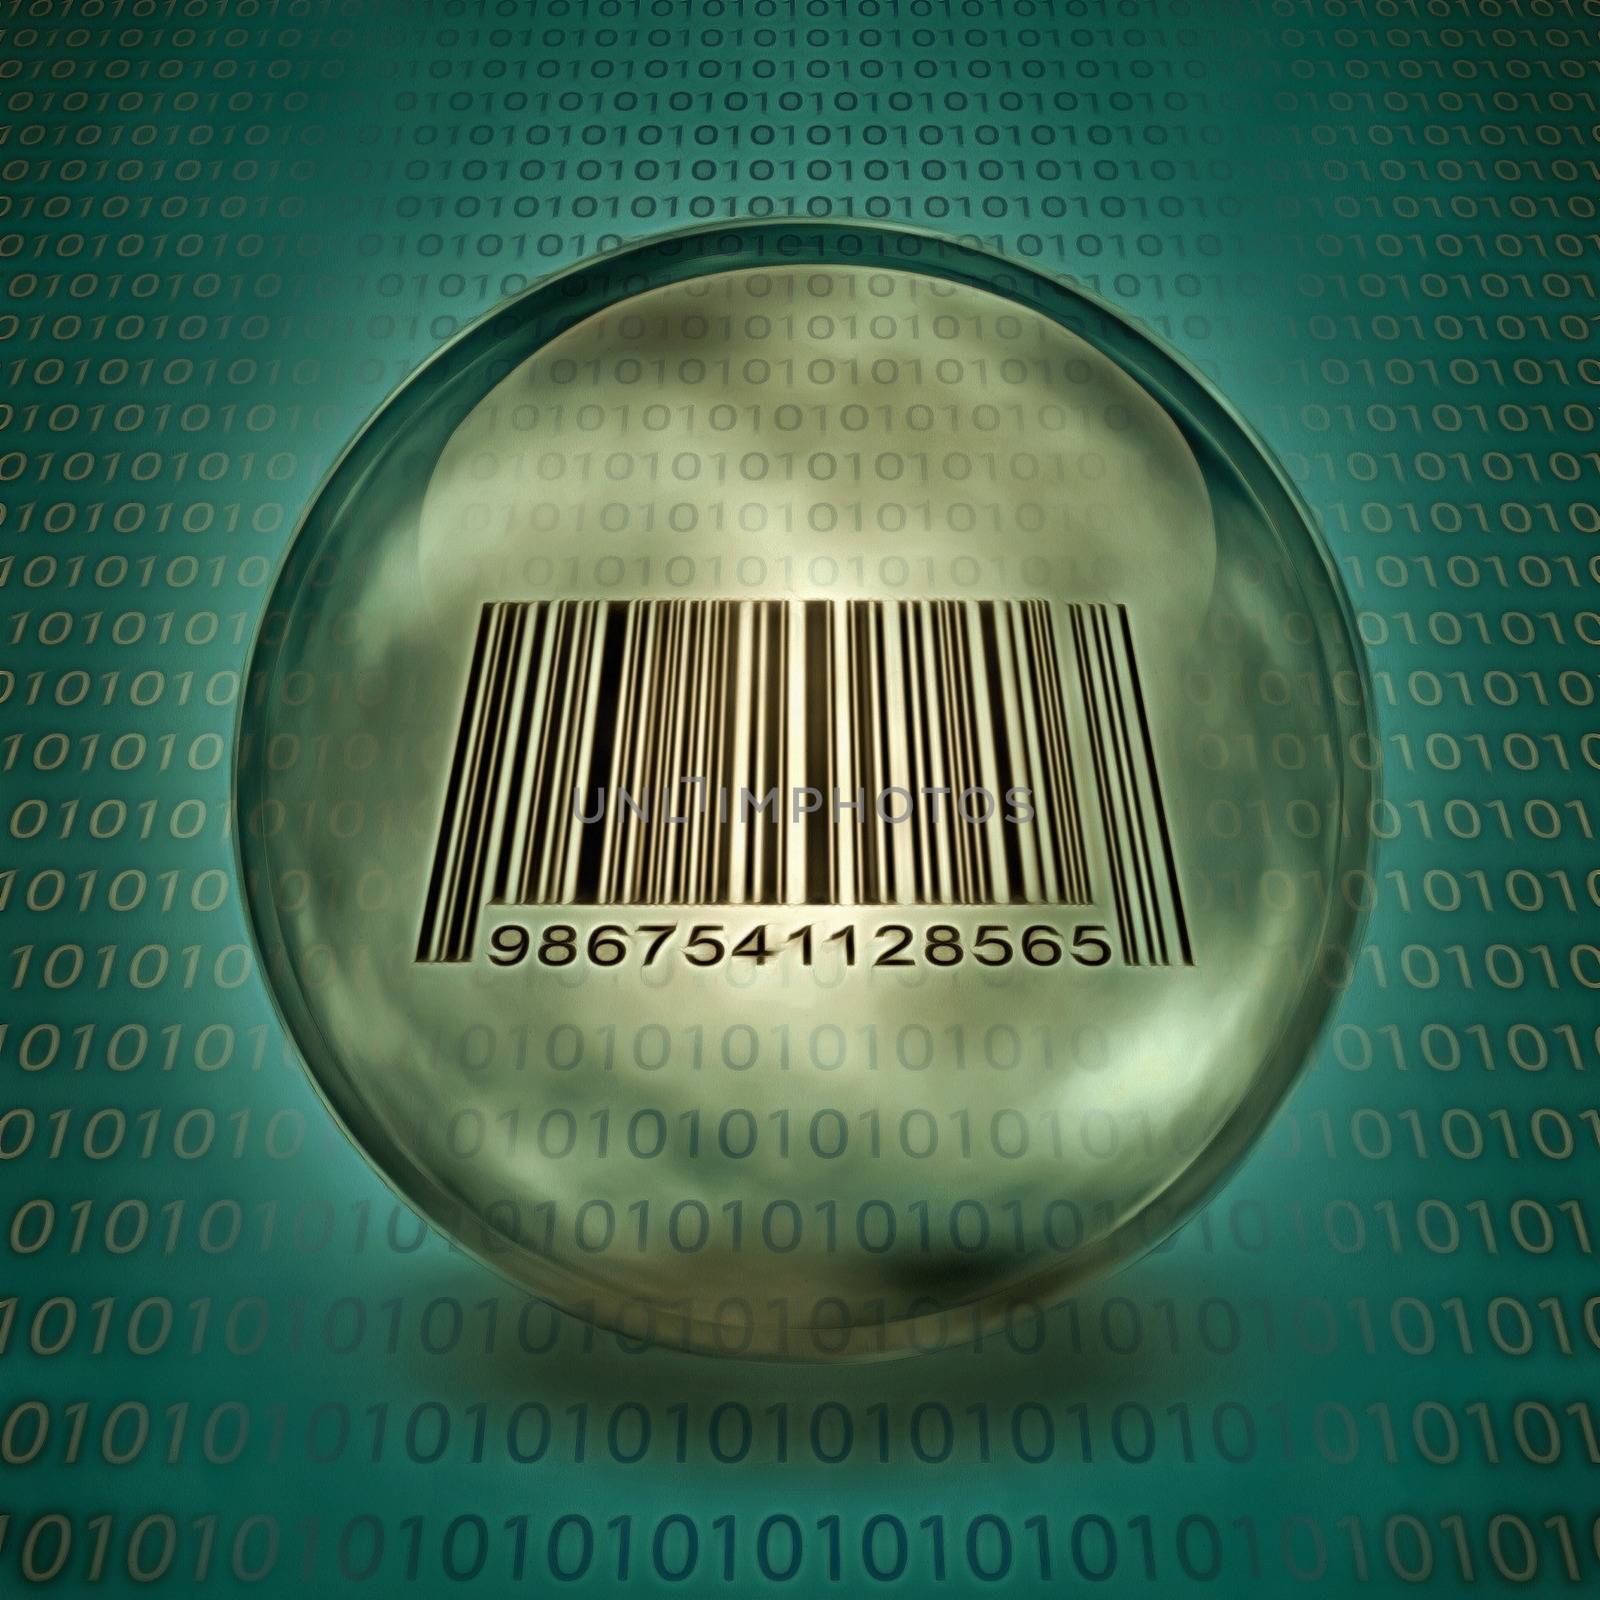 Crystal sphere with barcode inside. Binary code on a background